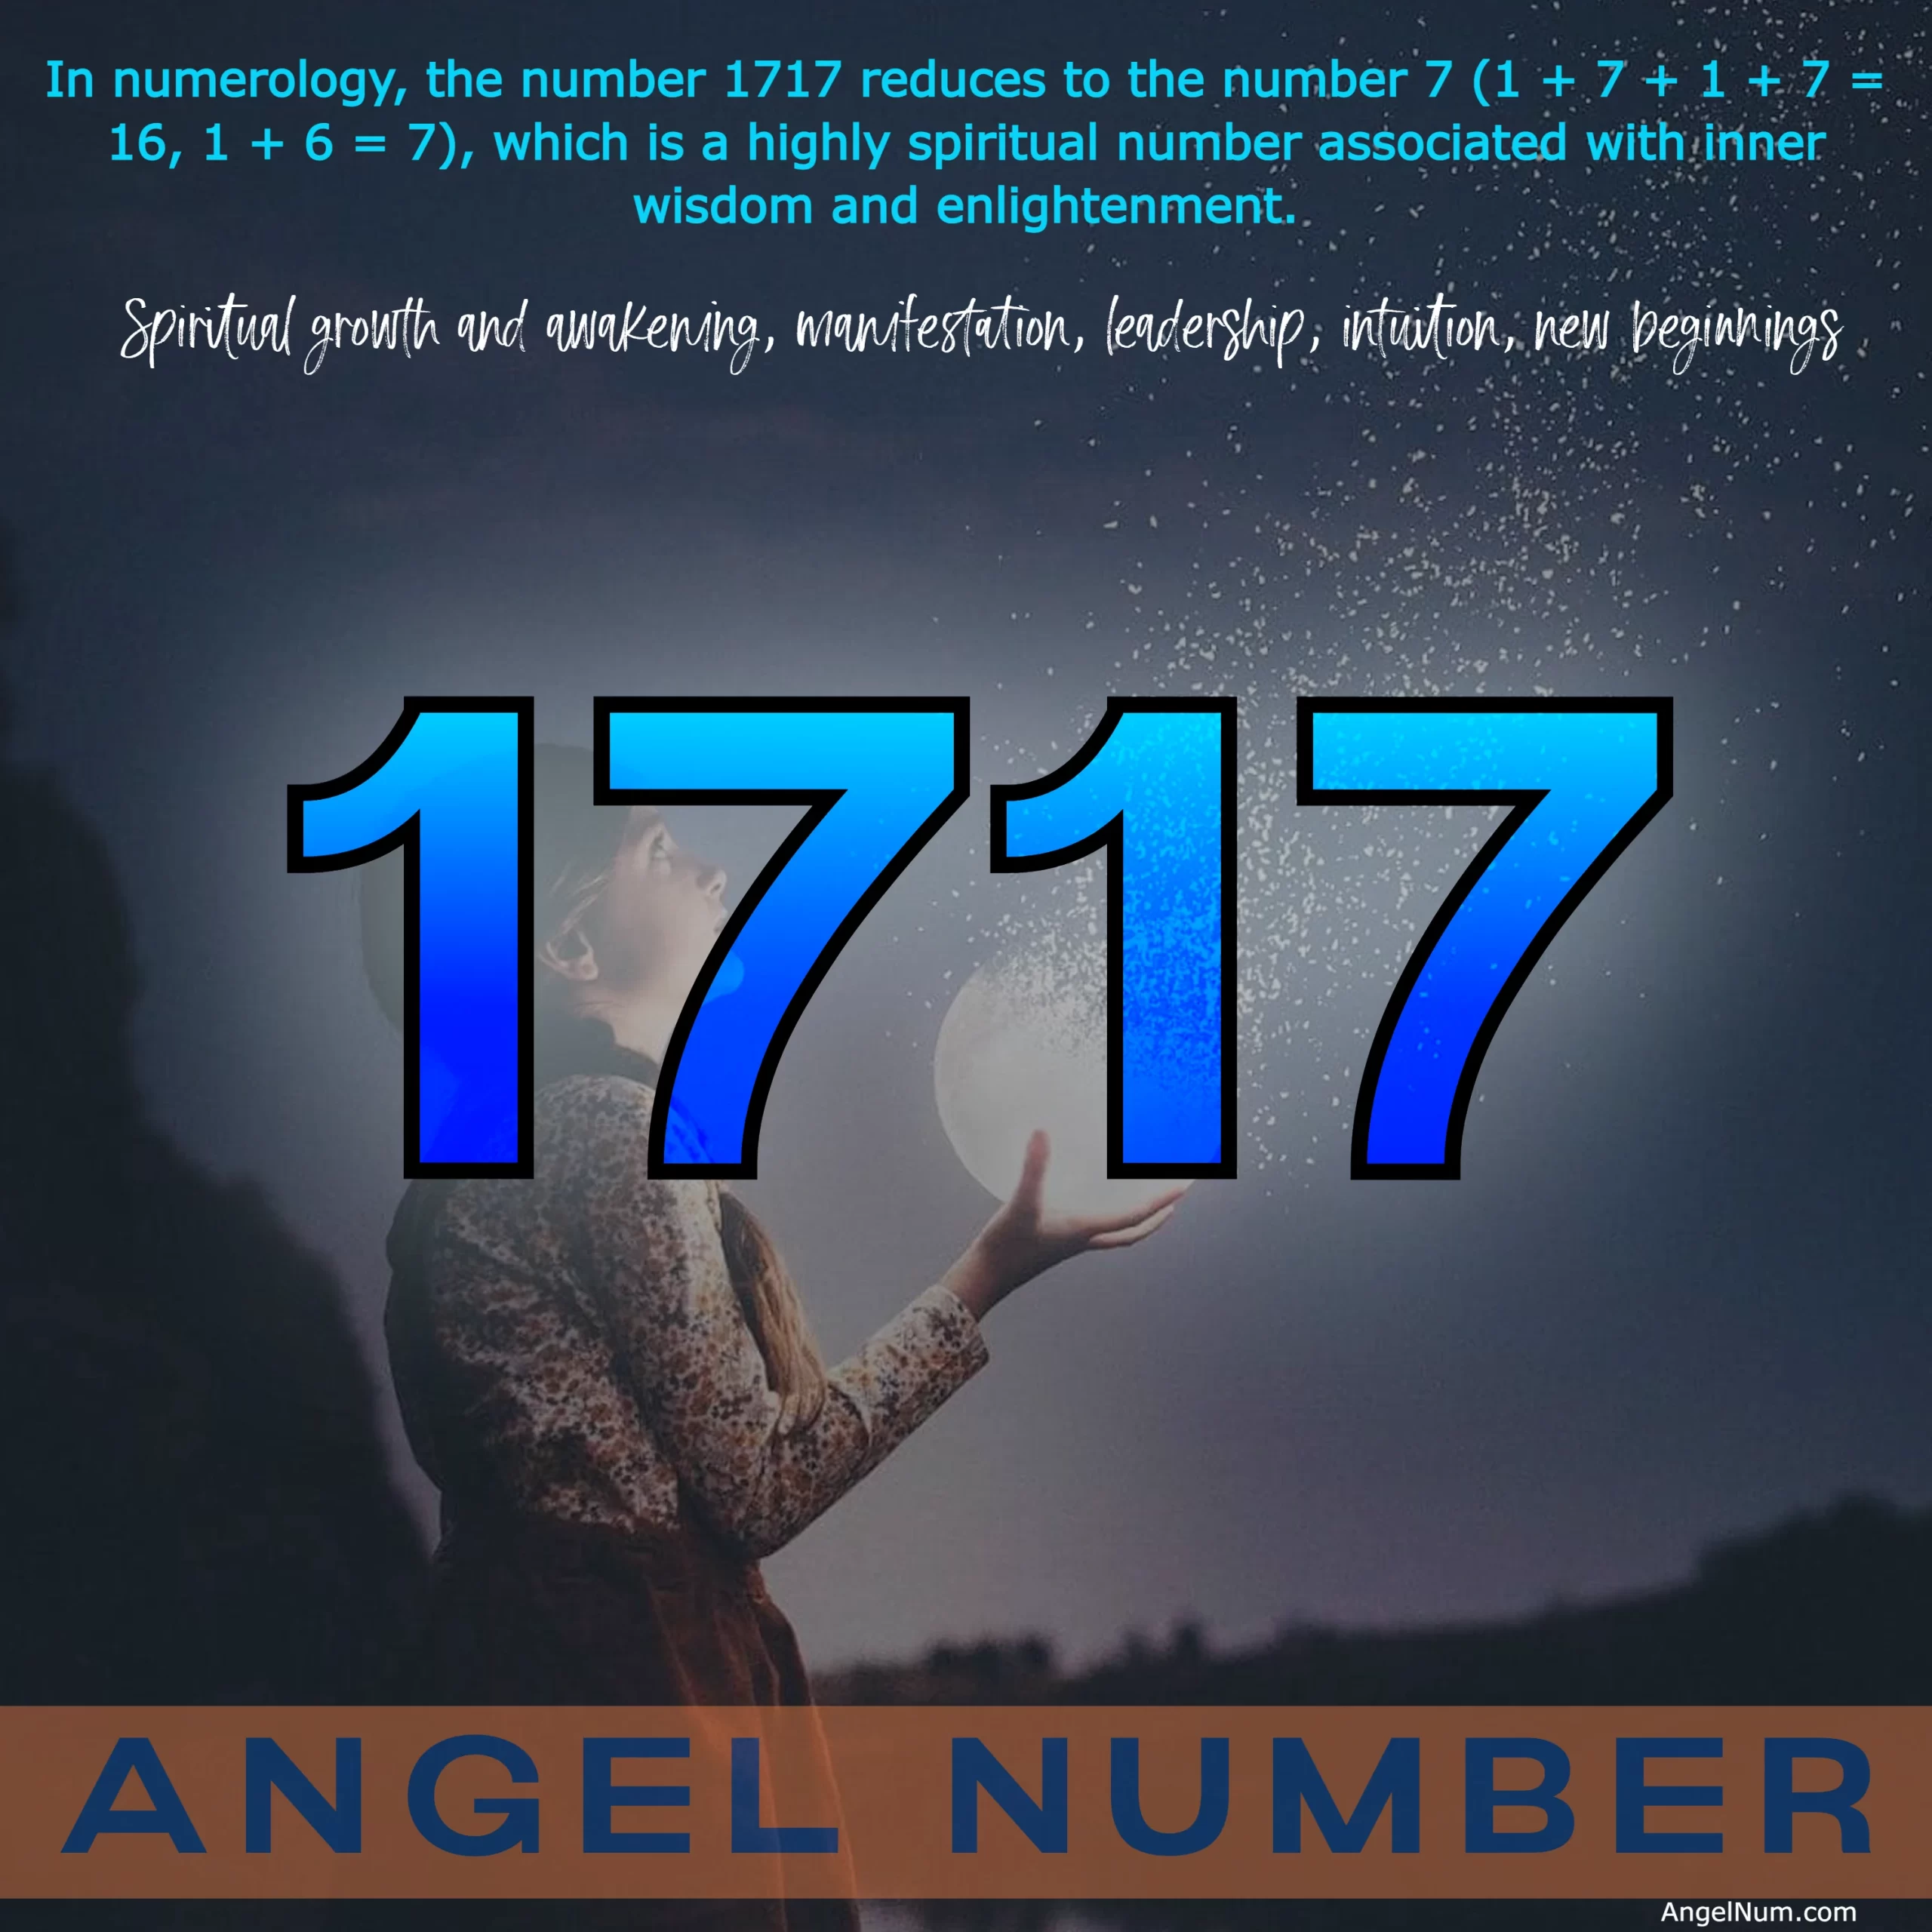 Angel Number 1717: Spiritual Growth, Manifestation, and New Beginnings